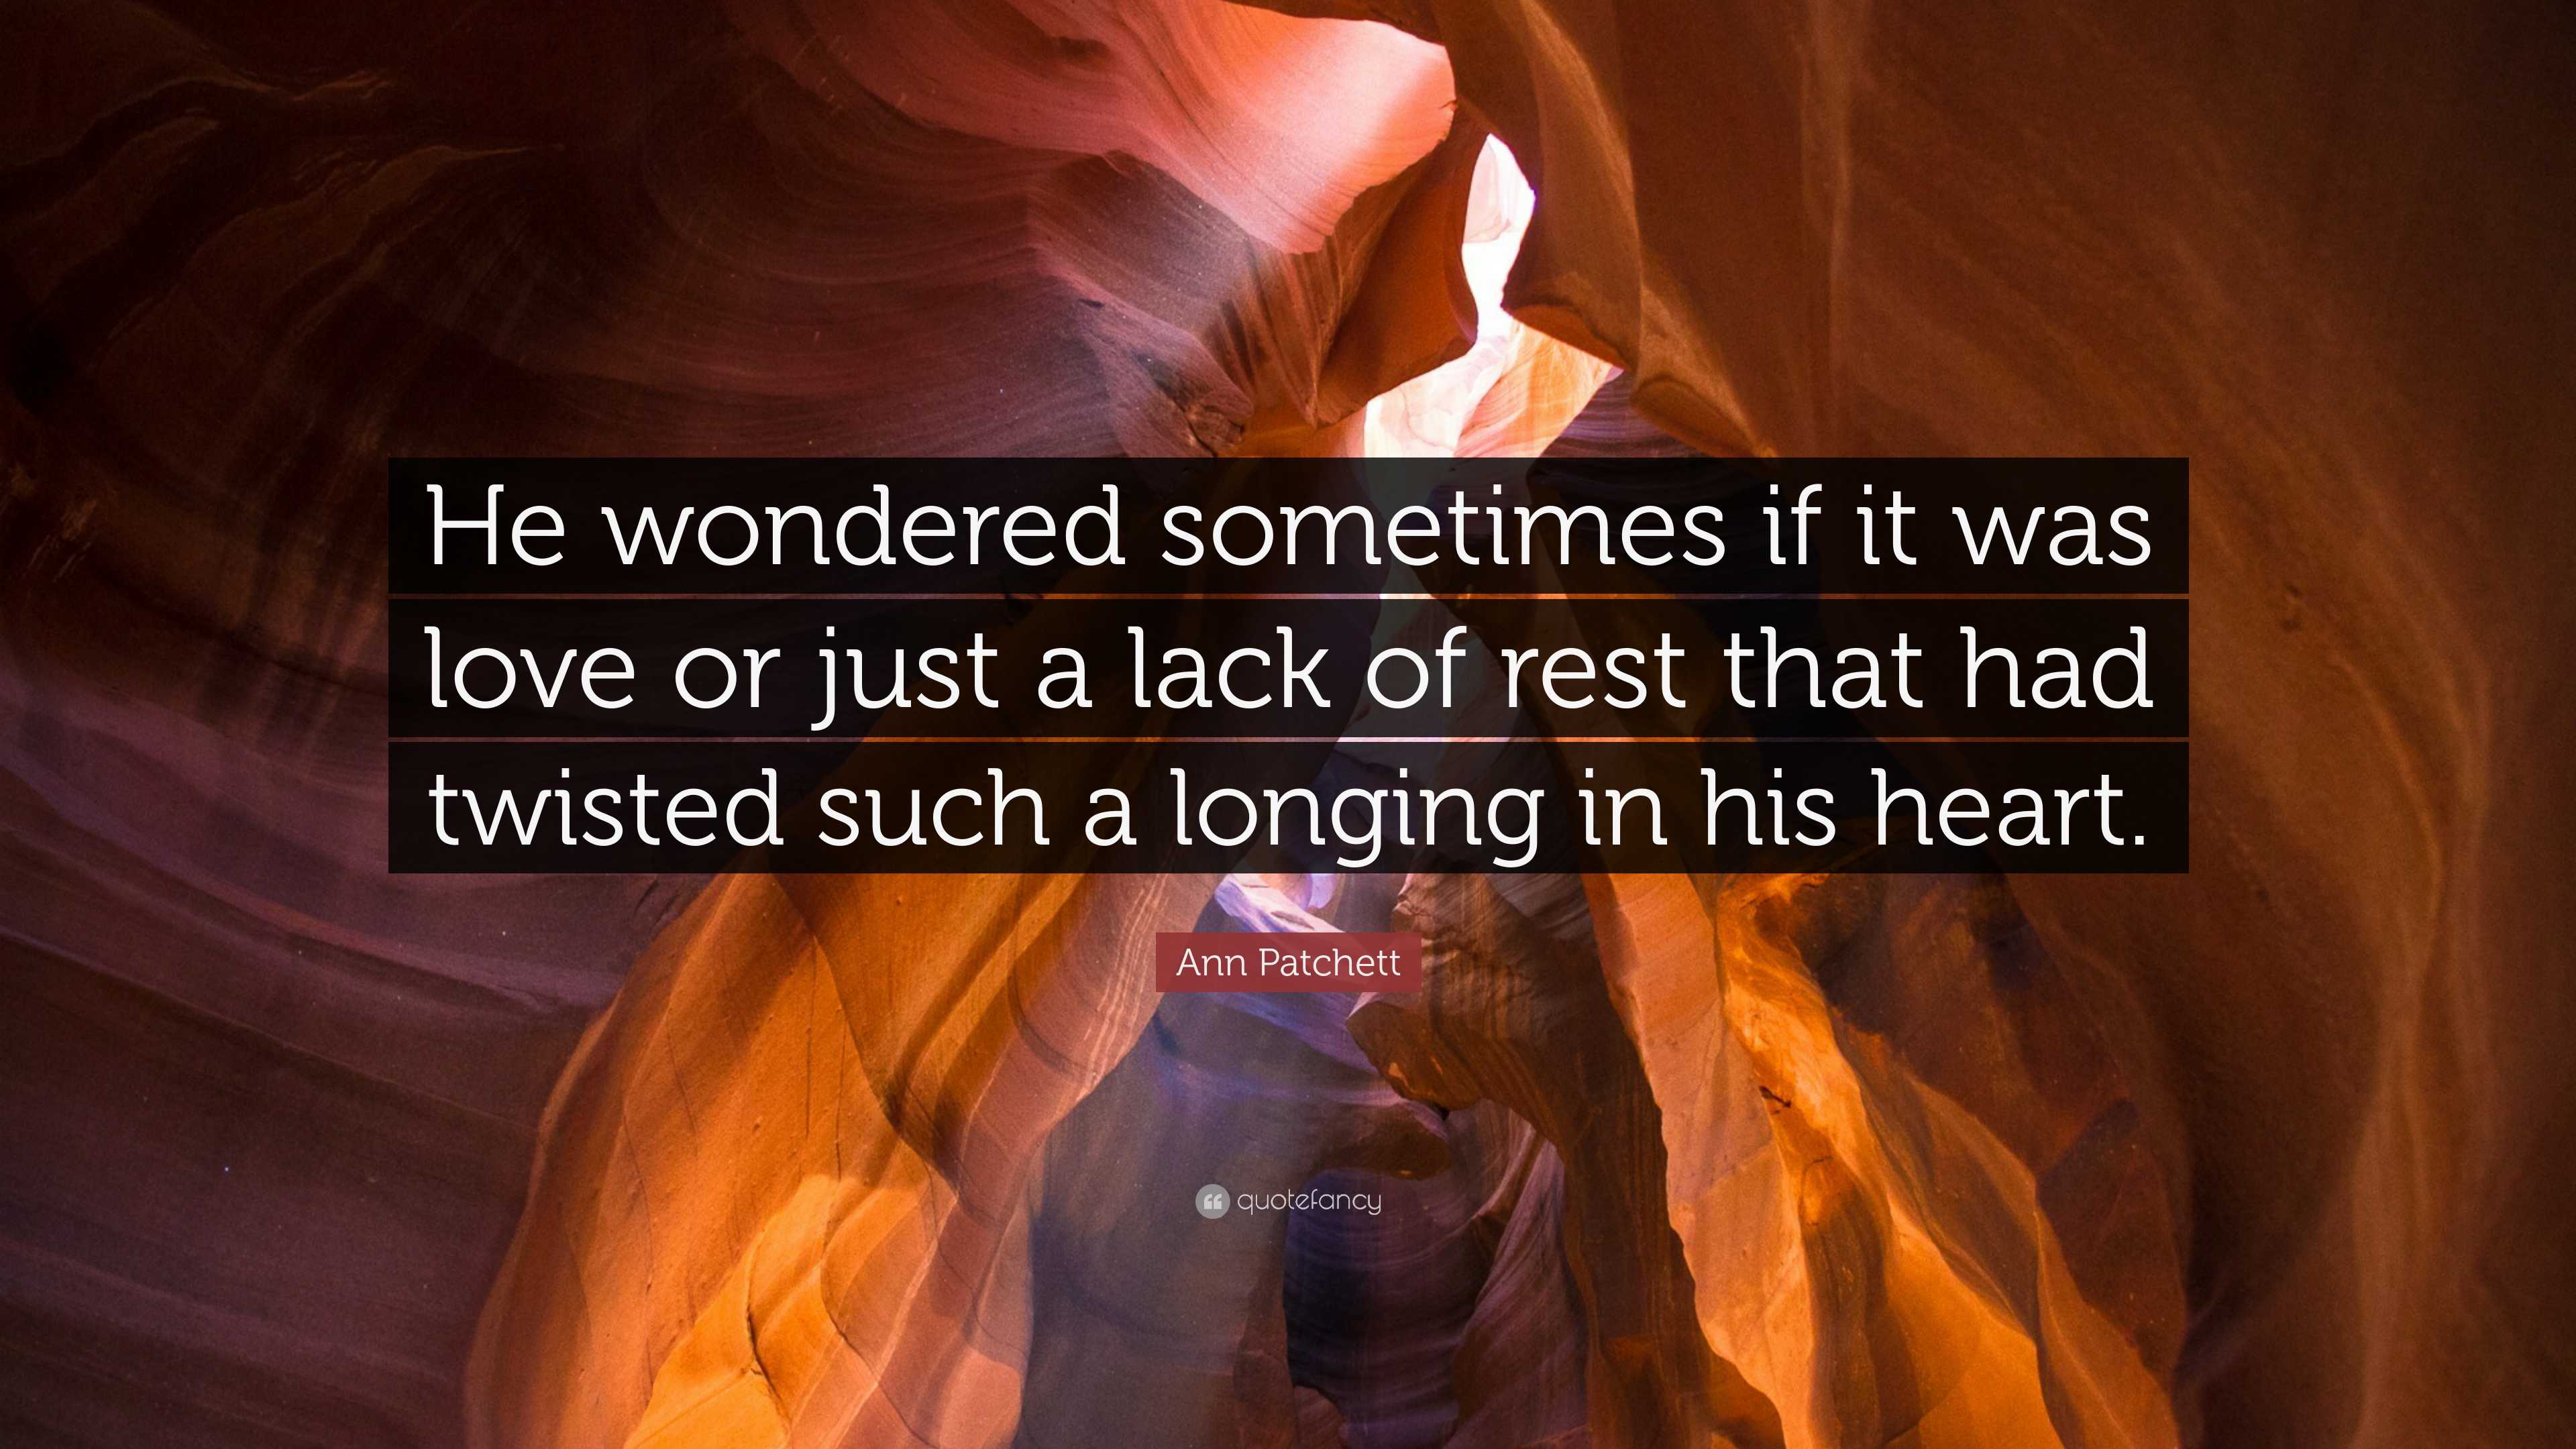 Ann Patchett Quote: “He wondered sometimes if it was love or just a ...